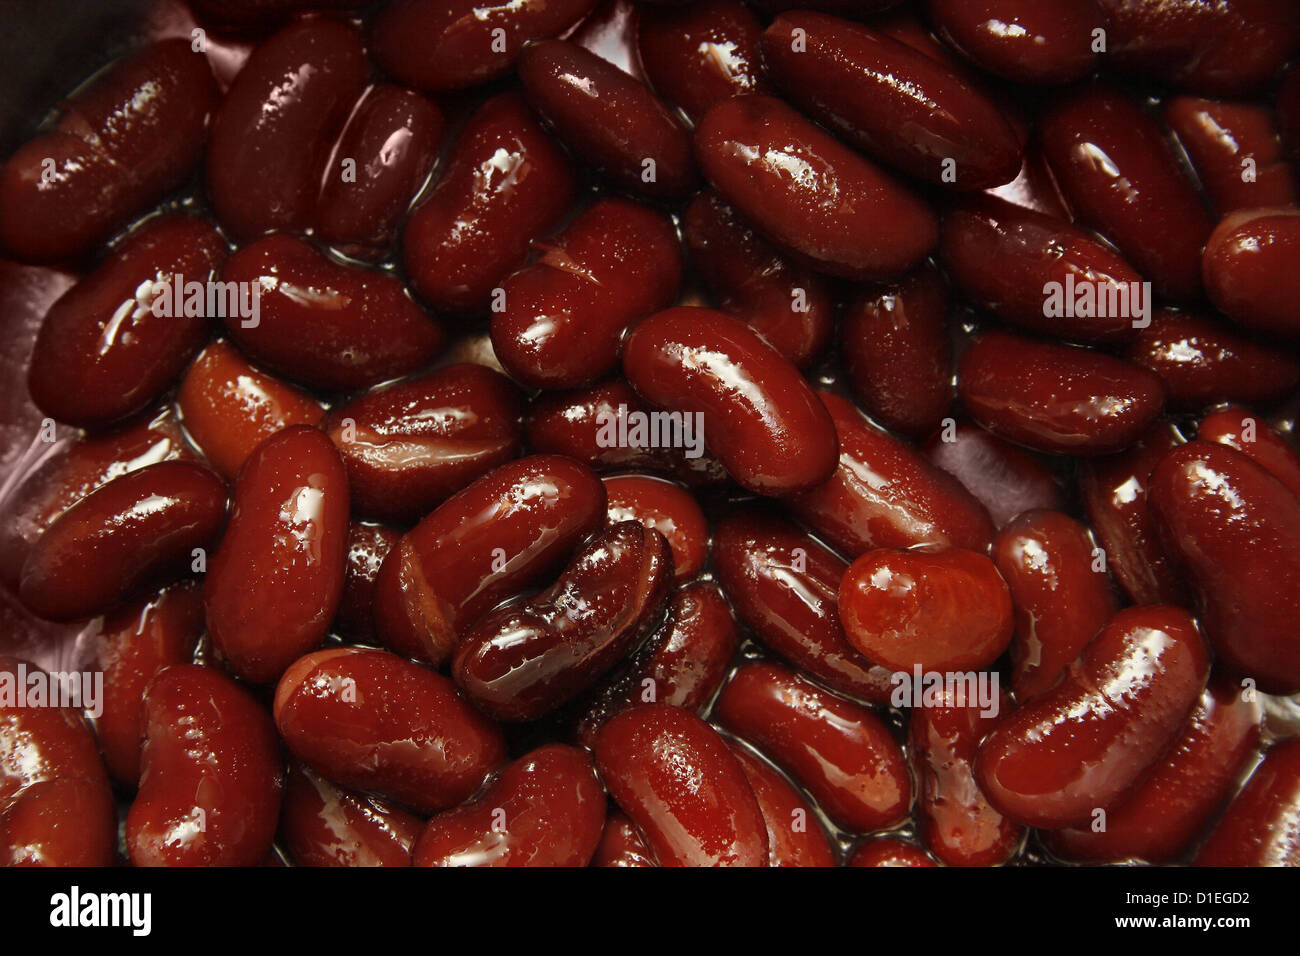 close up image of raw kidney beans Stock Photo